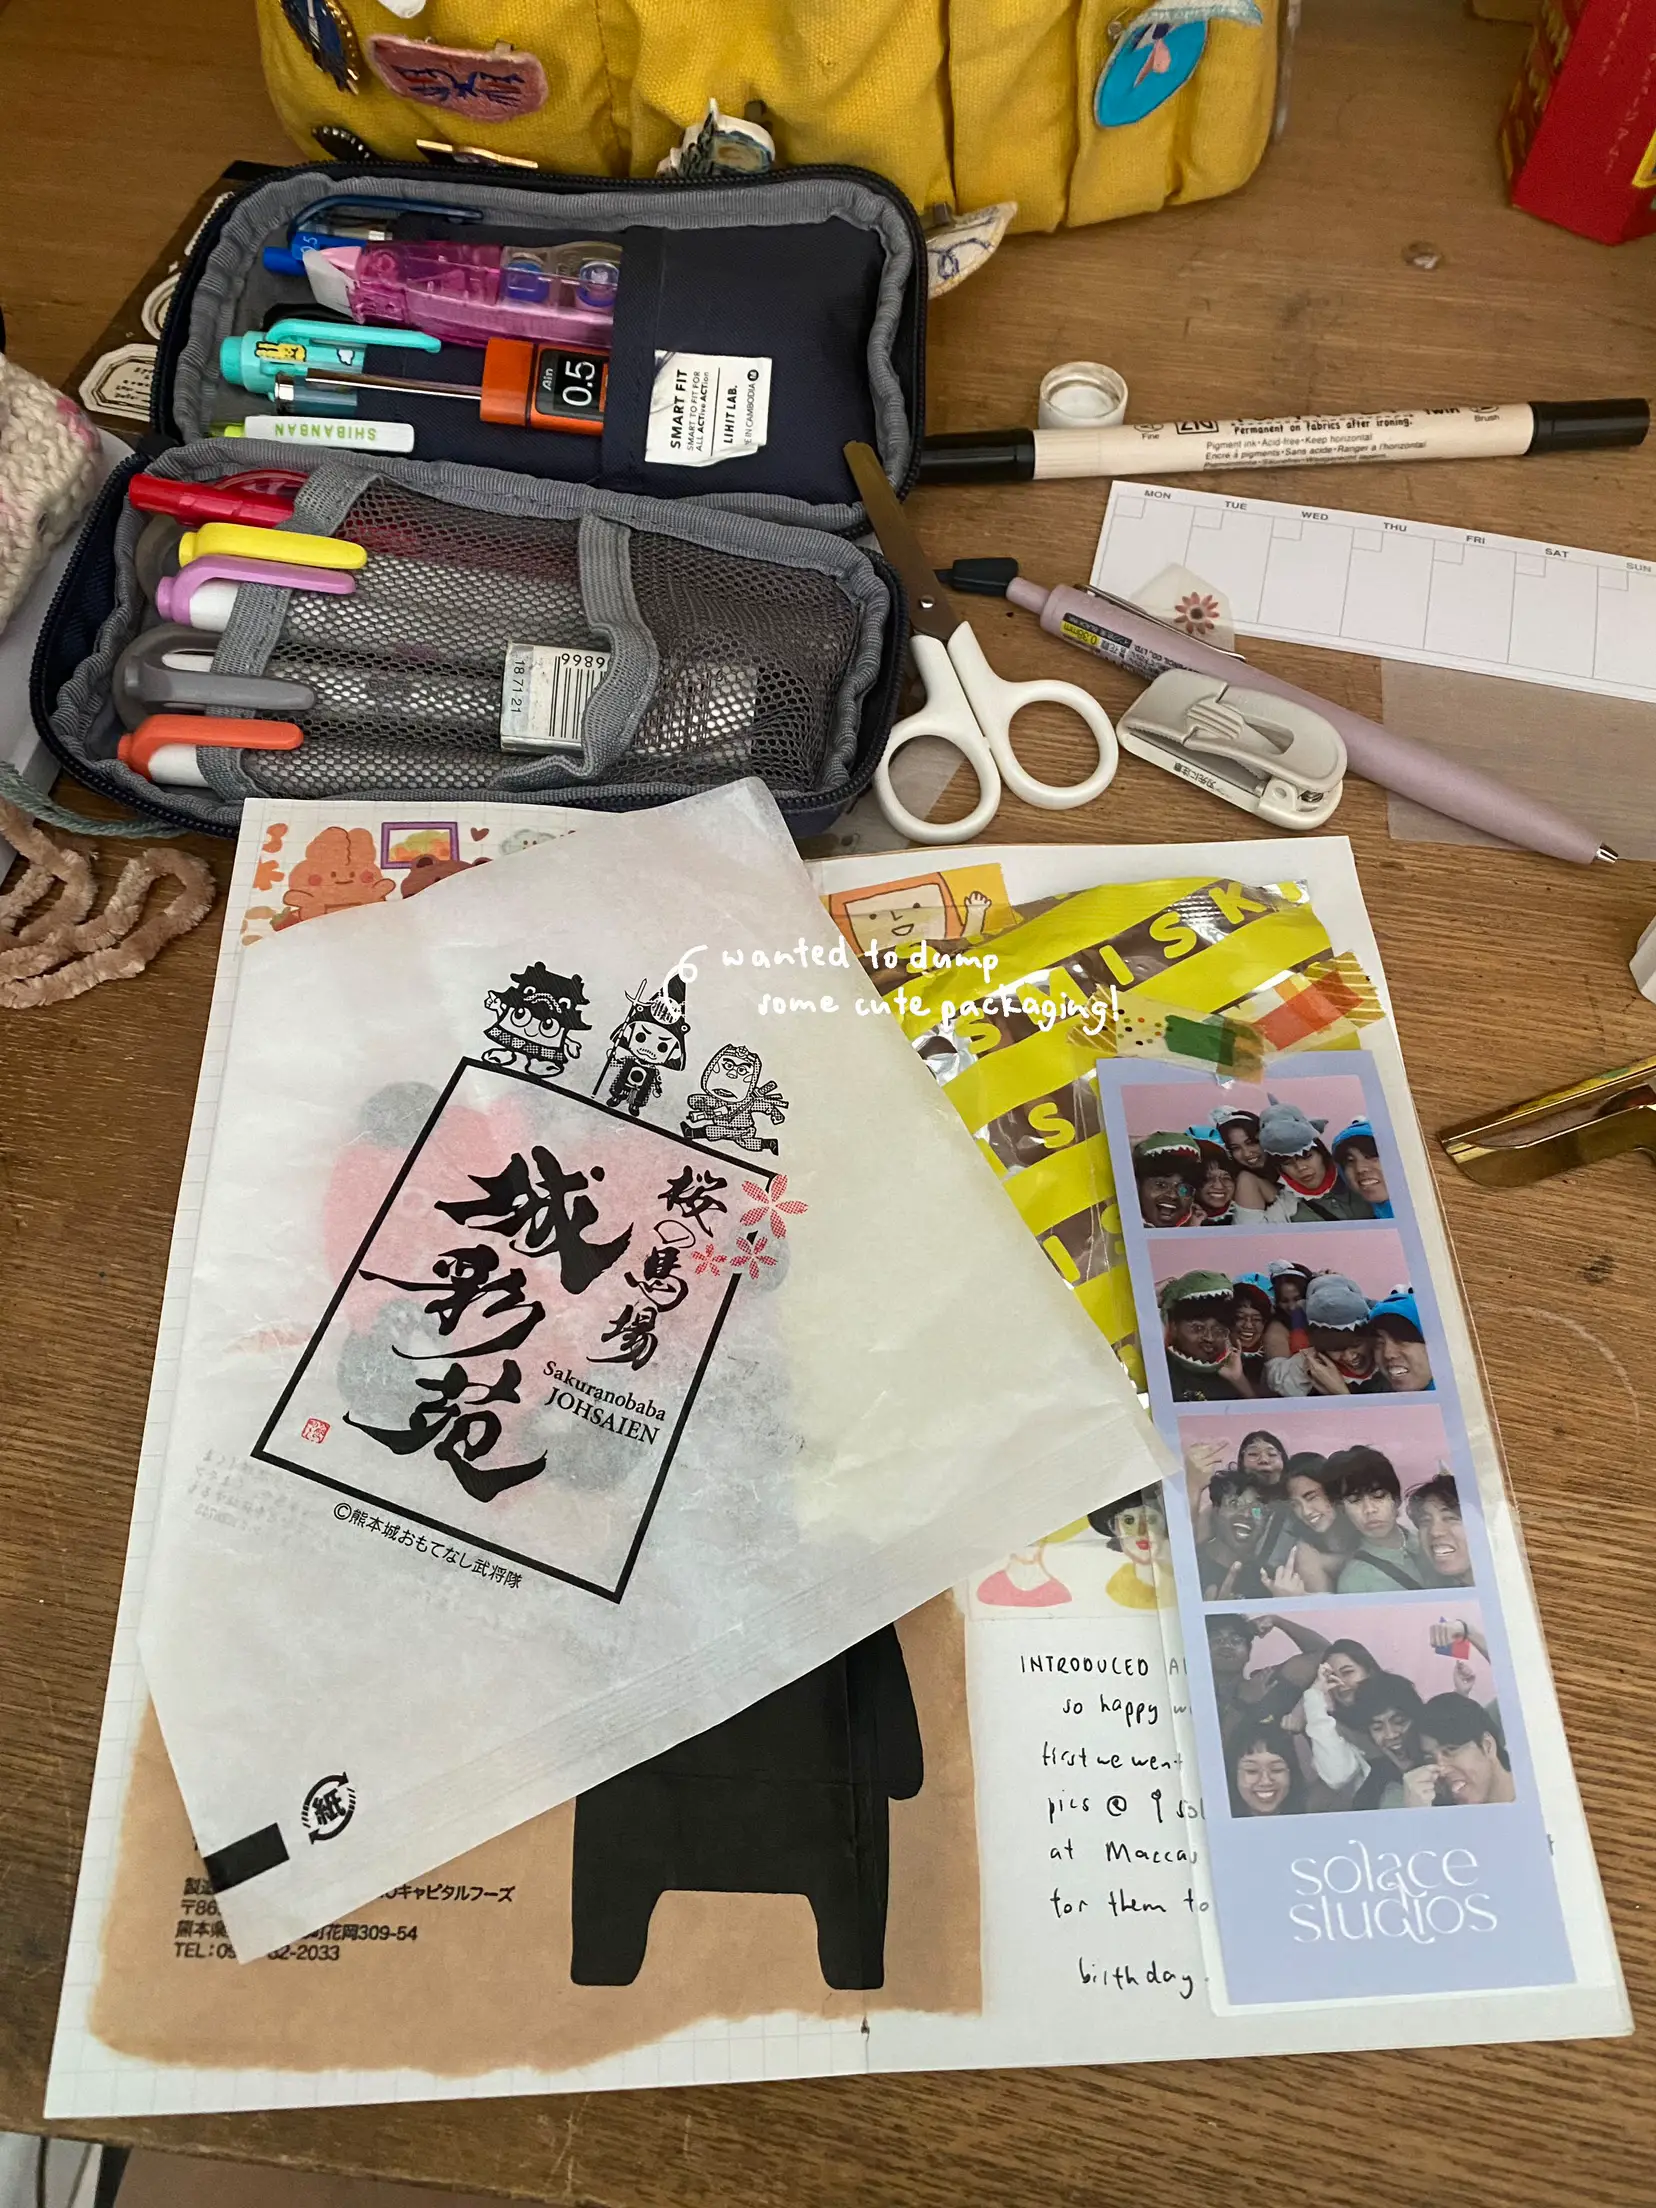 junk journaling⁉️ 's images(1)